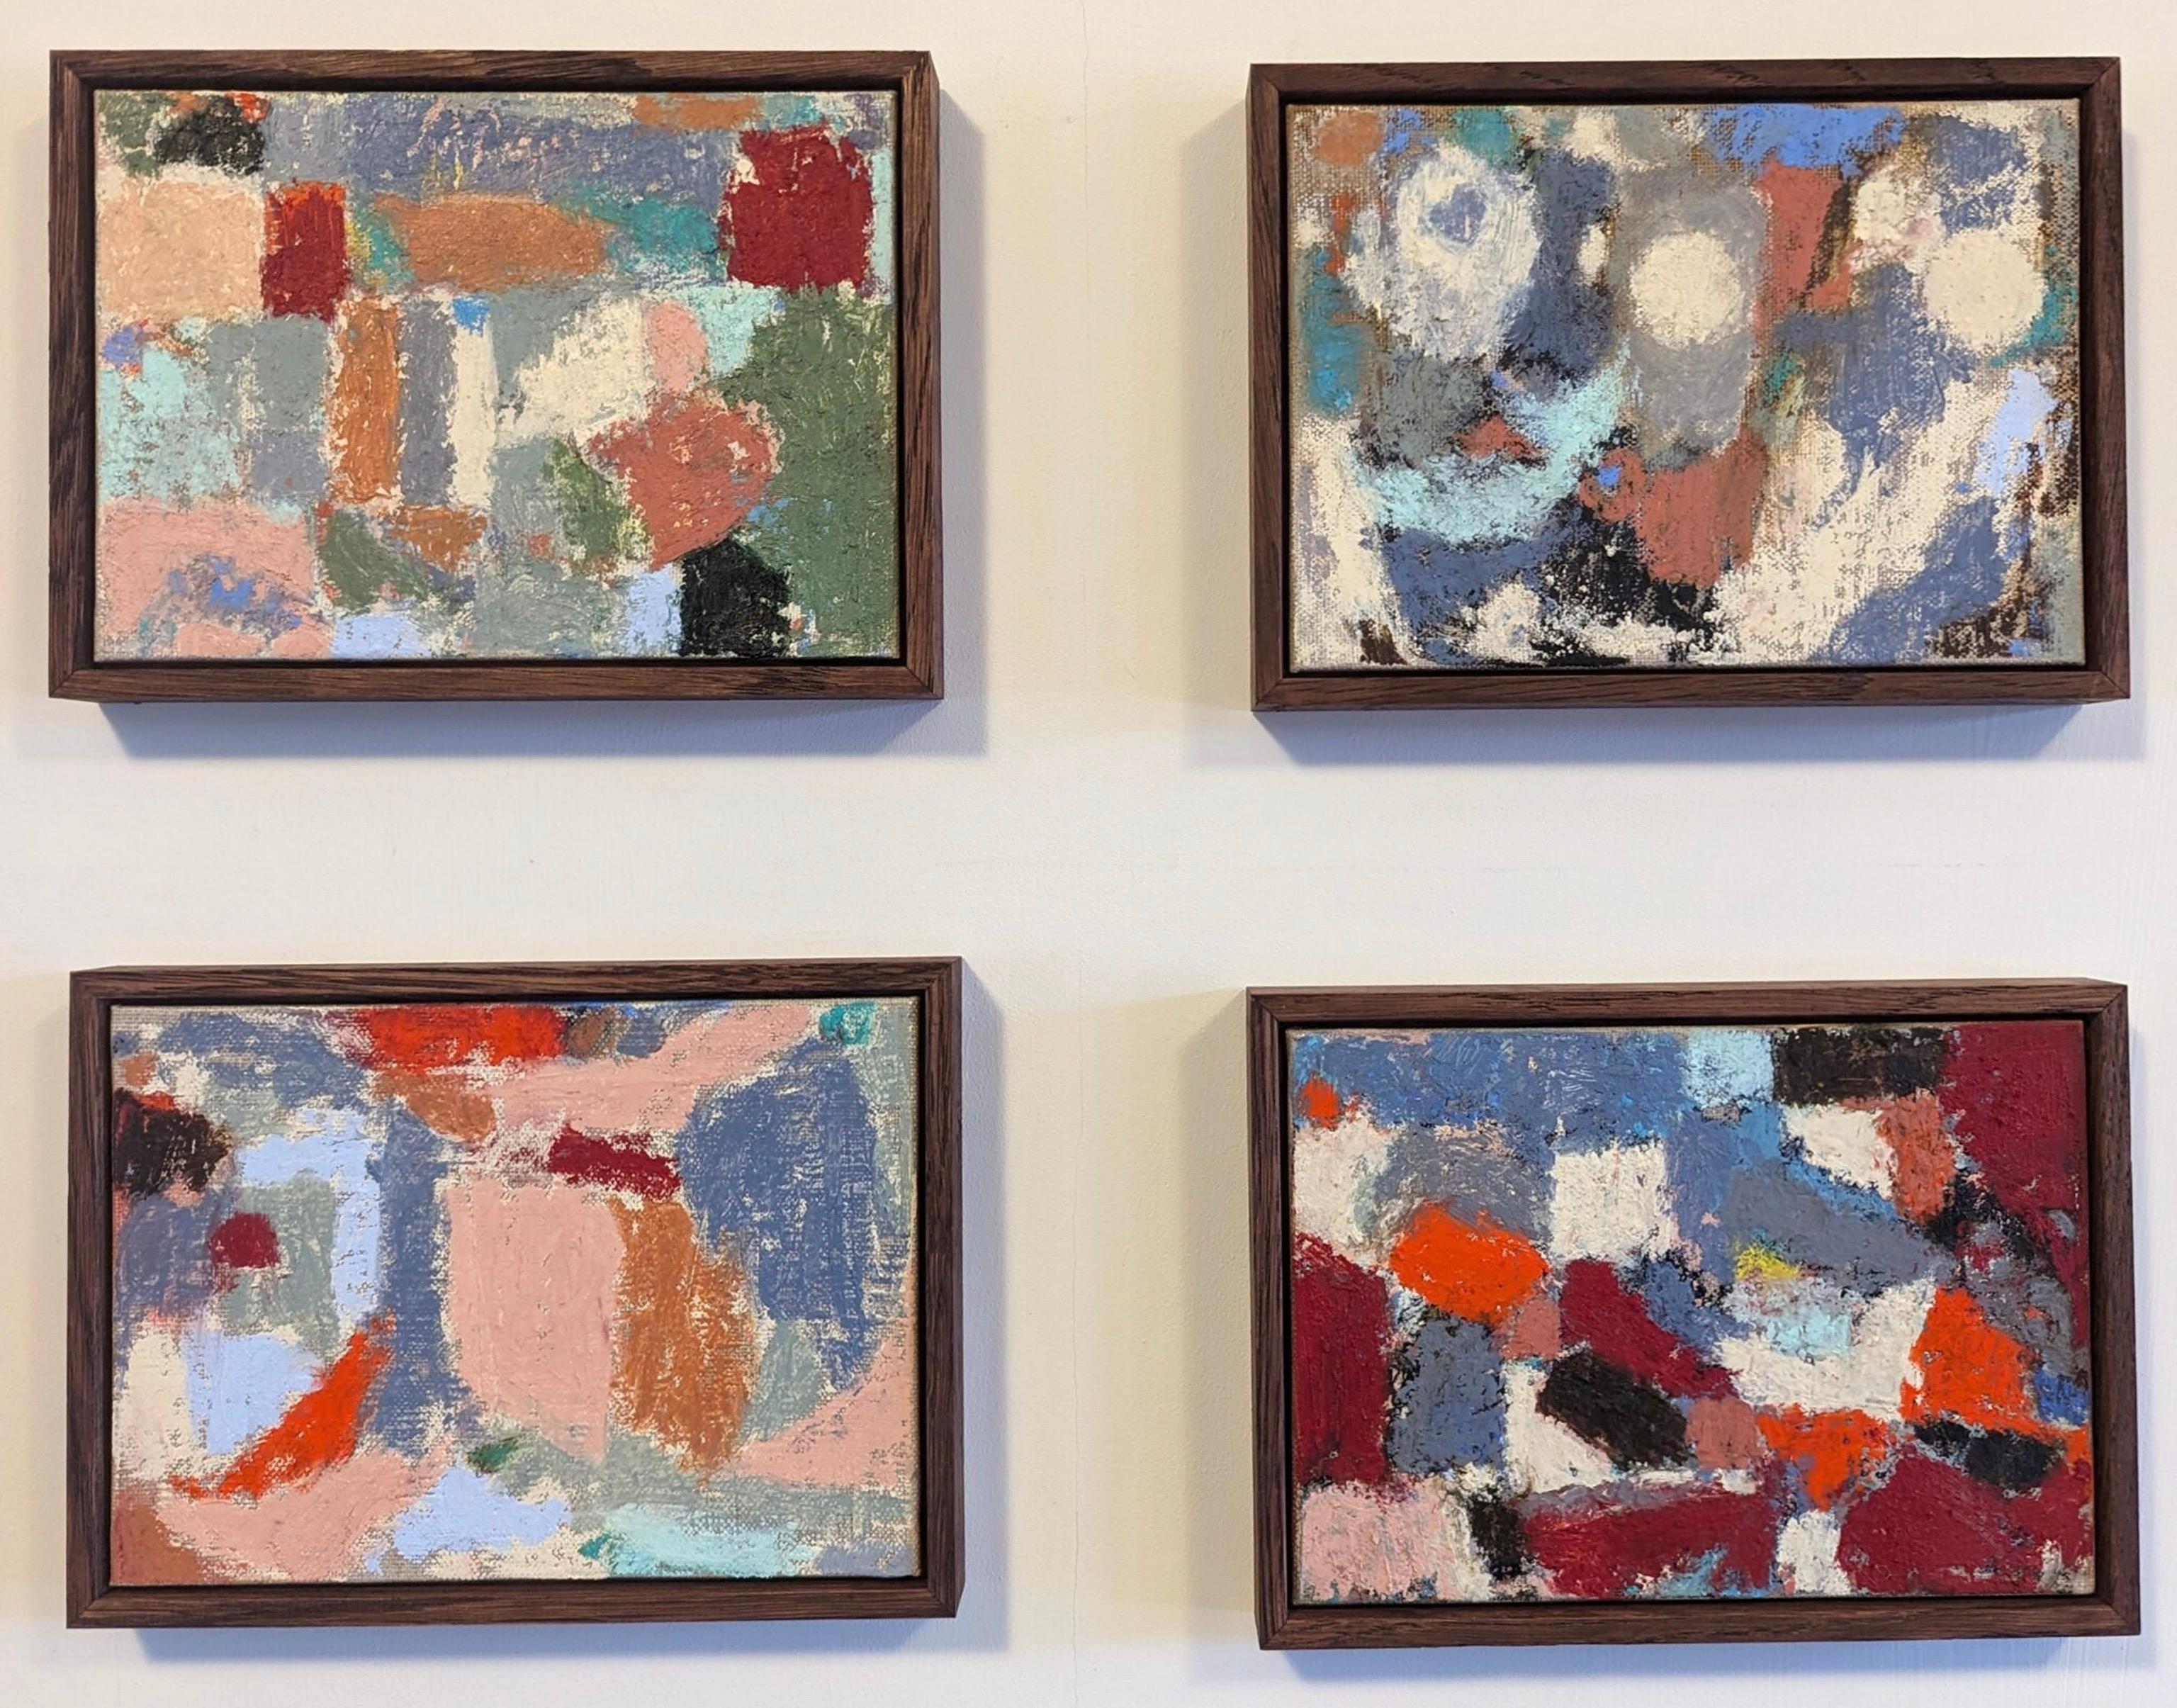 SET OF 4 MINI ABSTRACT OIL PAINTINGS
Size: 15 x 20 cm each (including frame) x4
Oil on linen panel

A small but powerful set of abstract compositions by contemporary British artist Lloyd Durling, painted with oil onto linen panel. Each one signed,